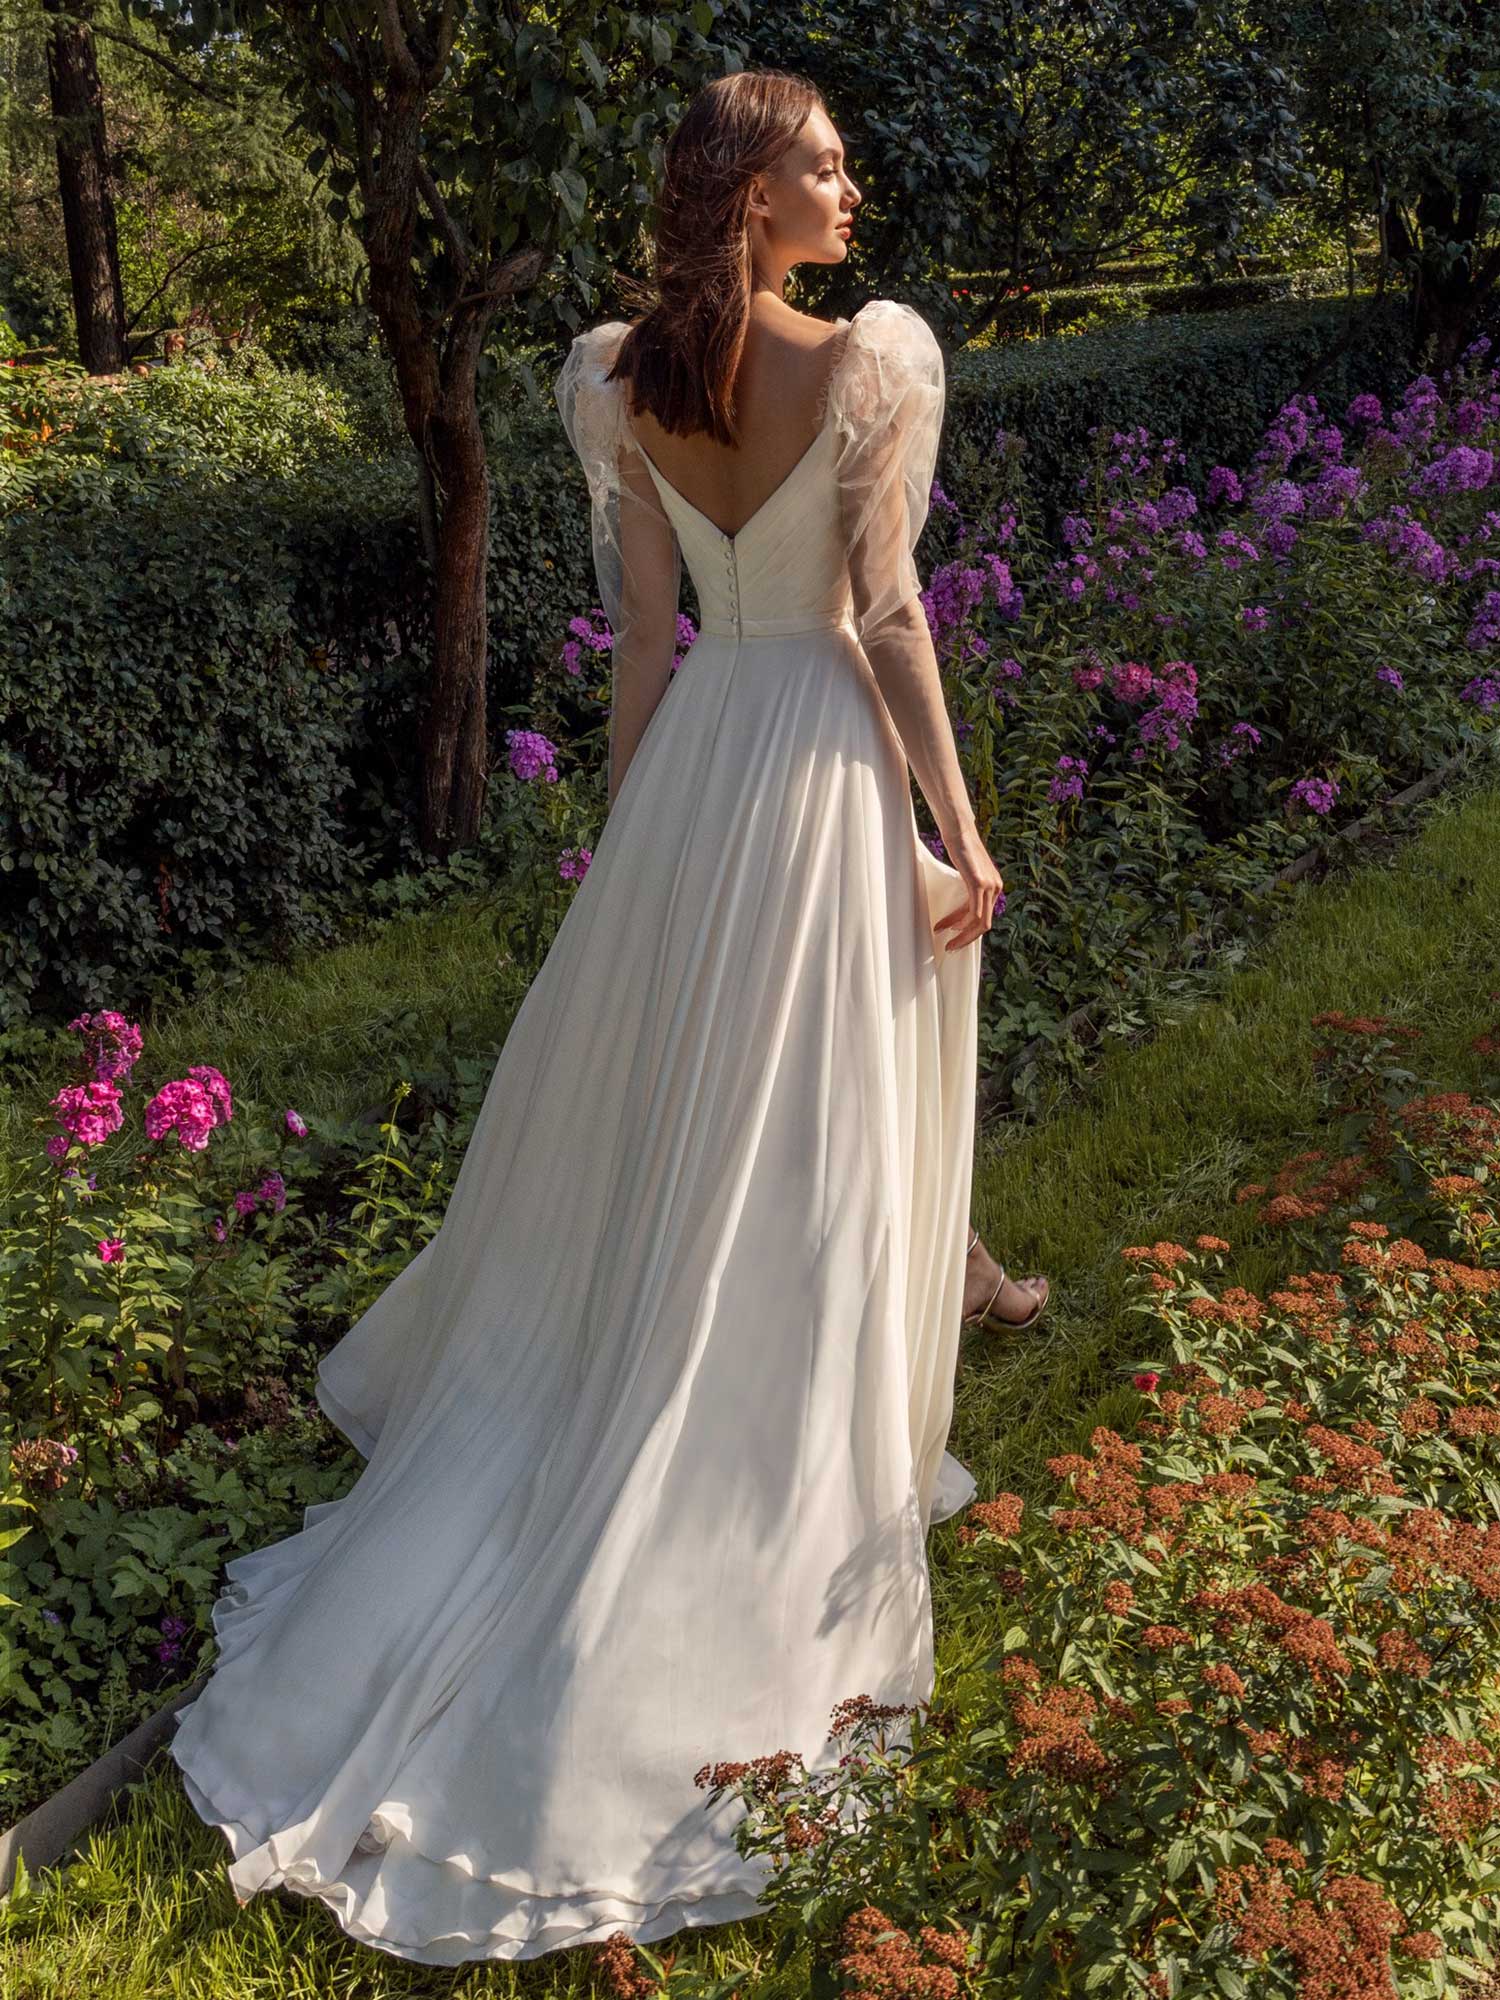 Long-sleeve sheath wedding dress with extended shoulders